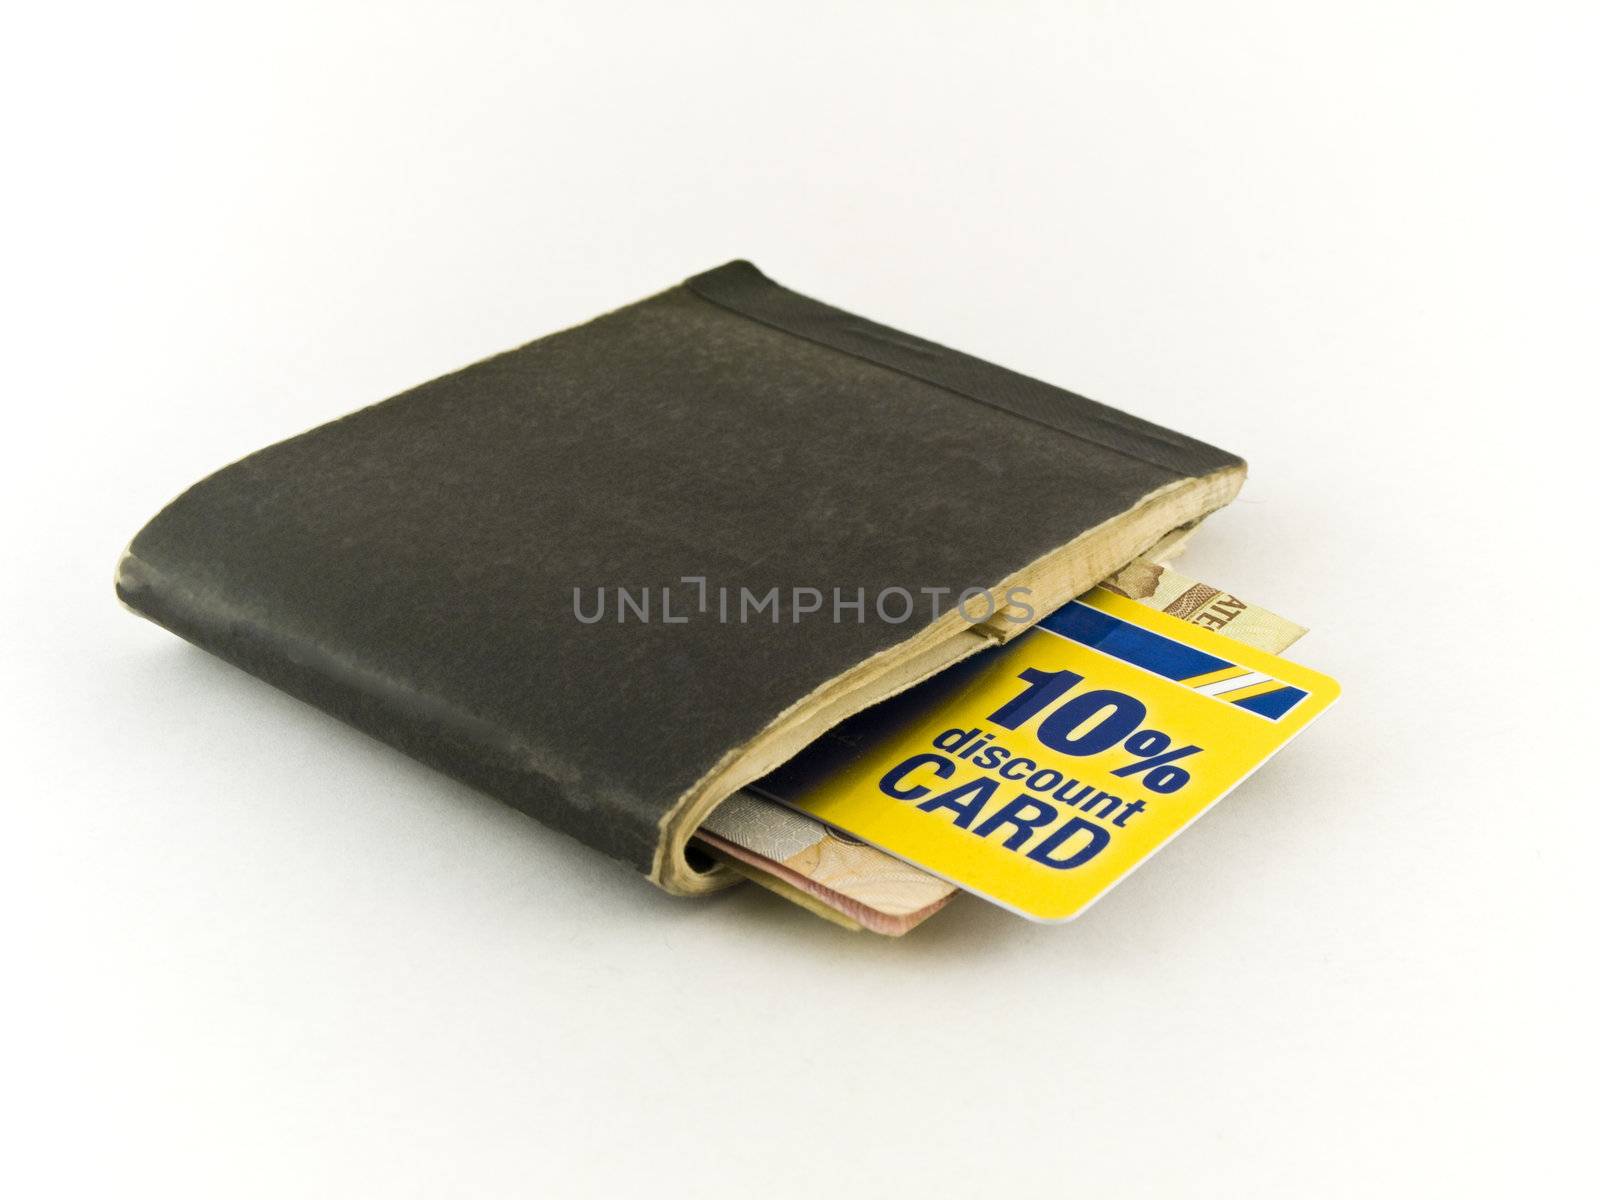 Old Chequebook and Discount Credit Card on White Background